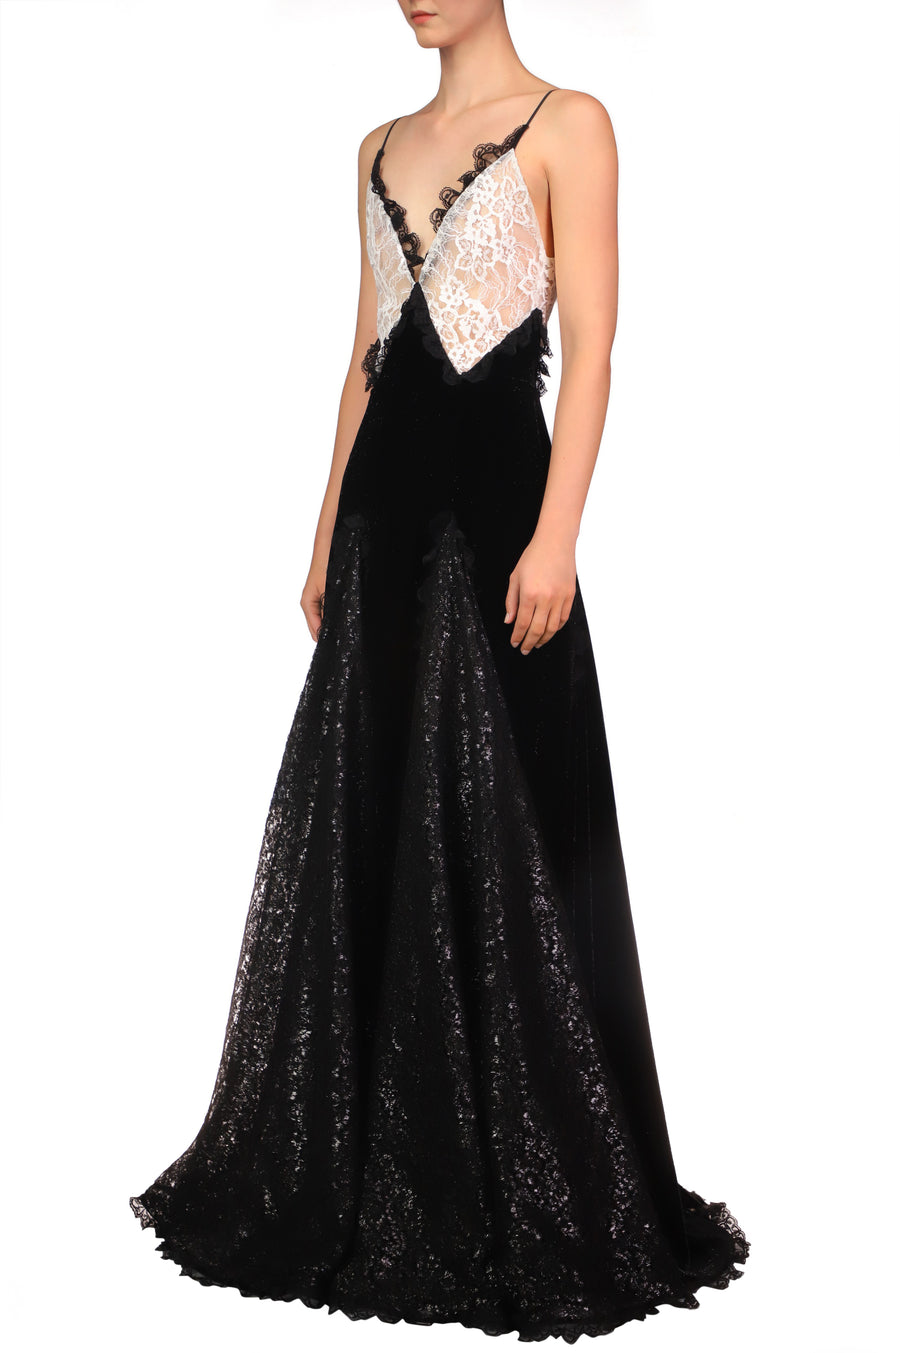 Metallic Black And White Lace And Velvet Gown With Lace Godets